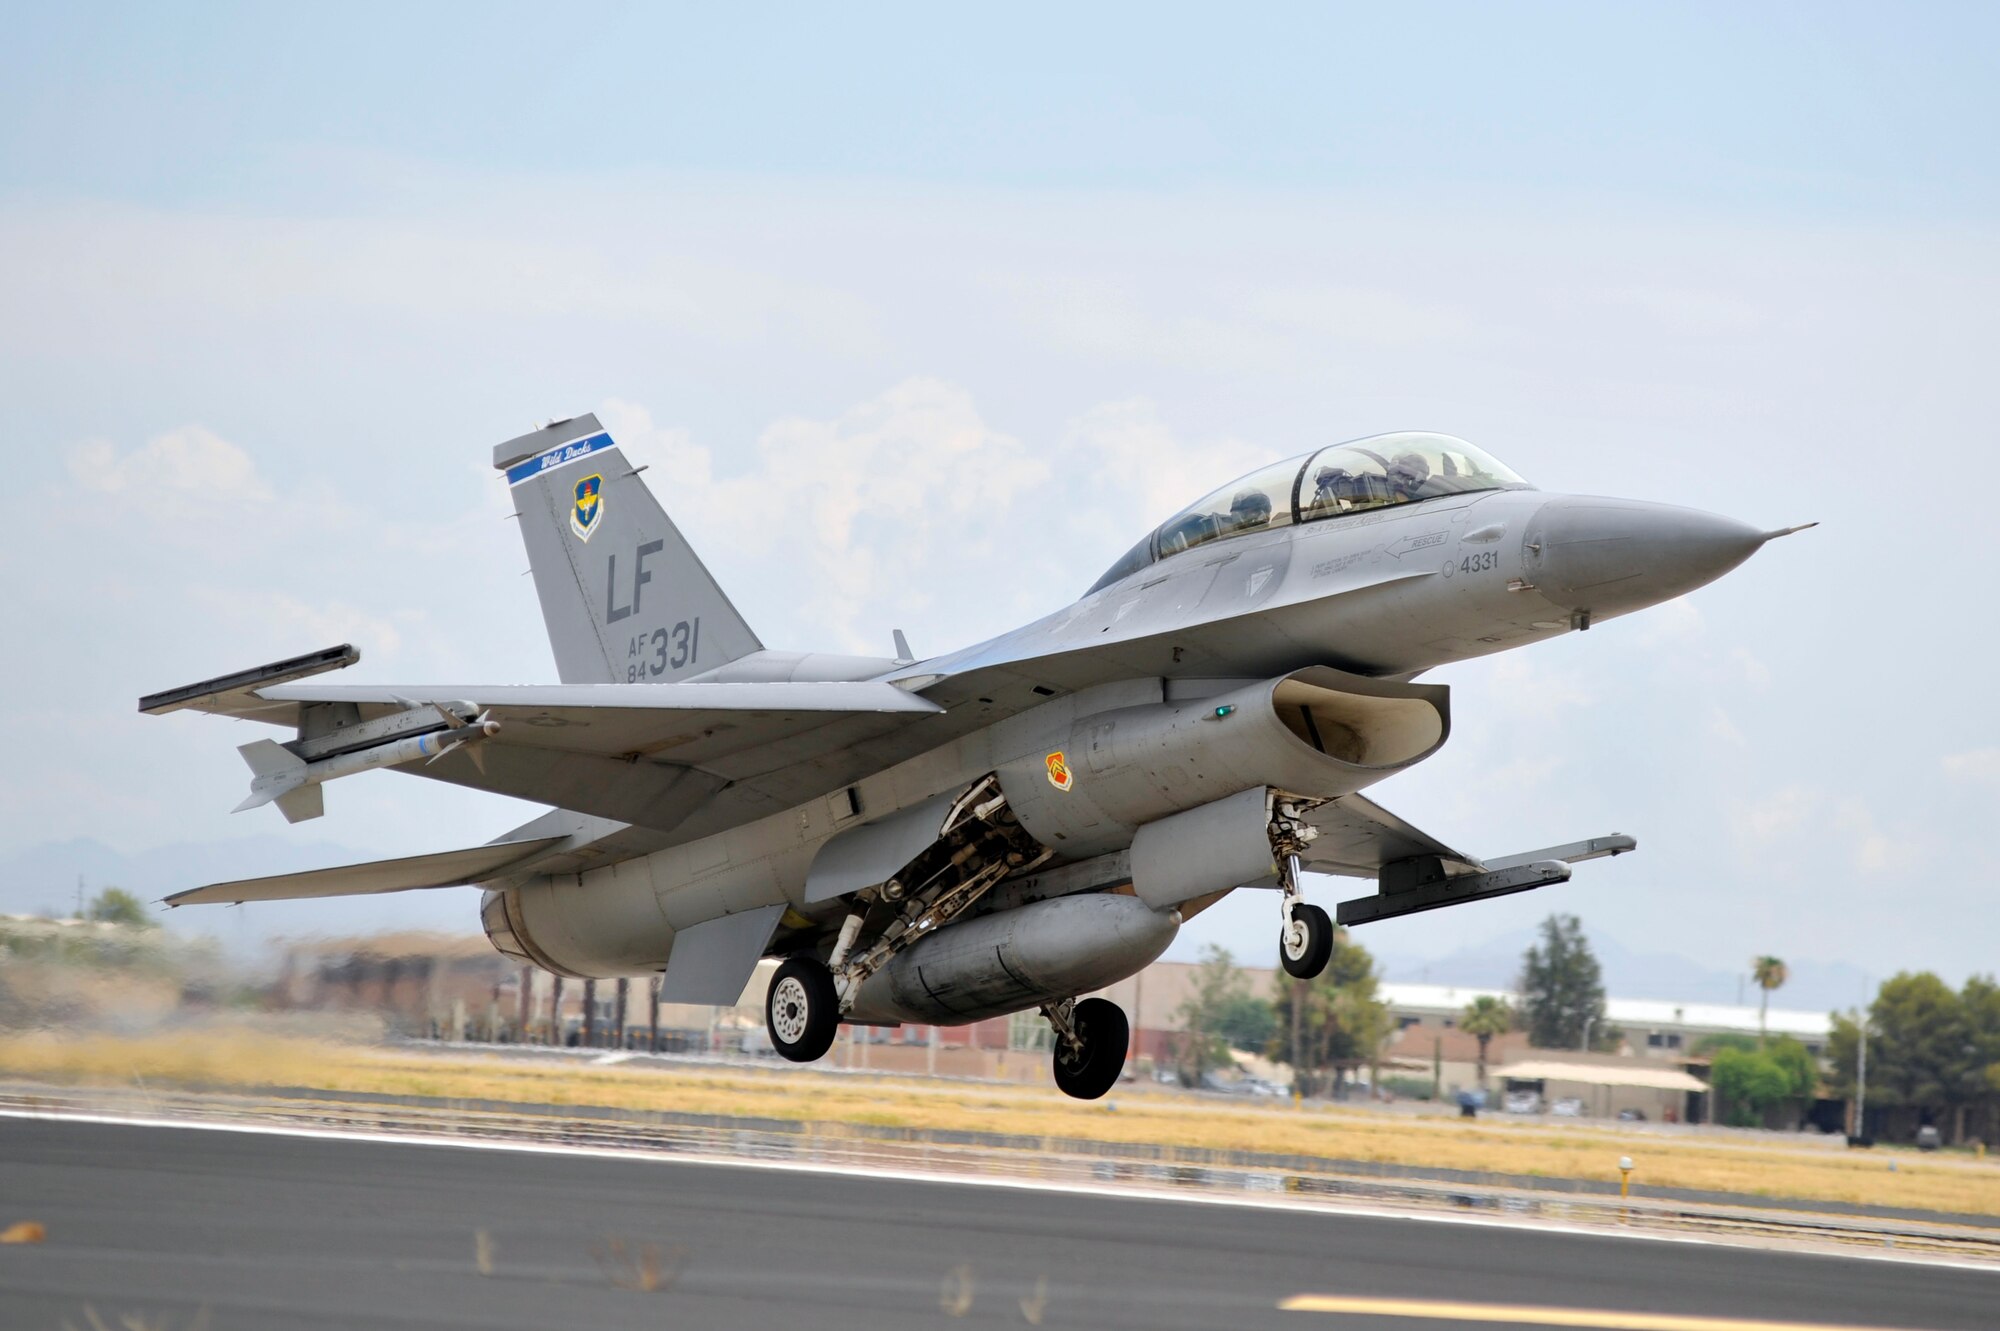 An F-16 Fighting Falcon pilot takes off July 17, 2017 at Luke Air Force Base, Ariz. The pilot was part of the capstone flight for the first F-35A Lightning II basic course at Luke. (U.S. Air Force photo/Airman 1st Class Pedro Mota)